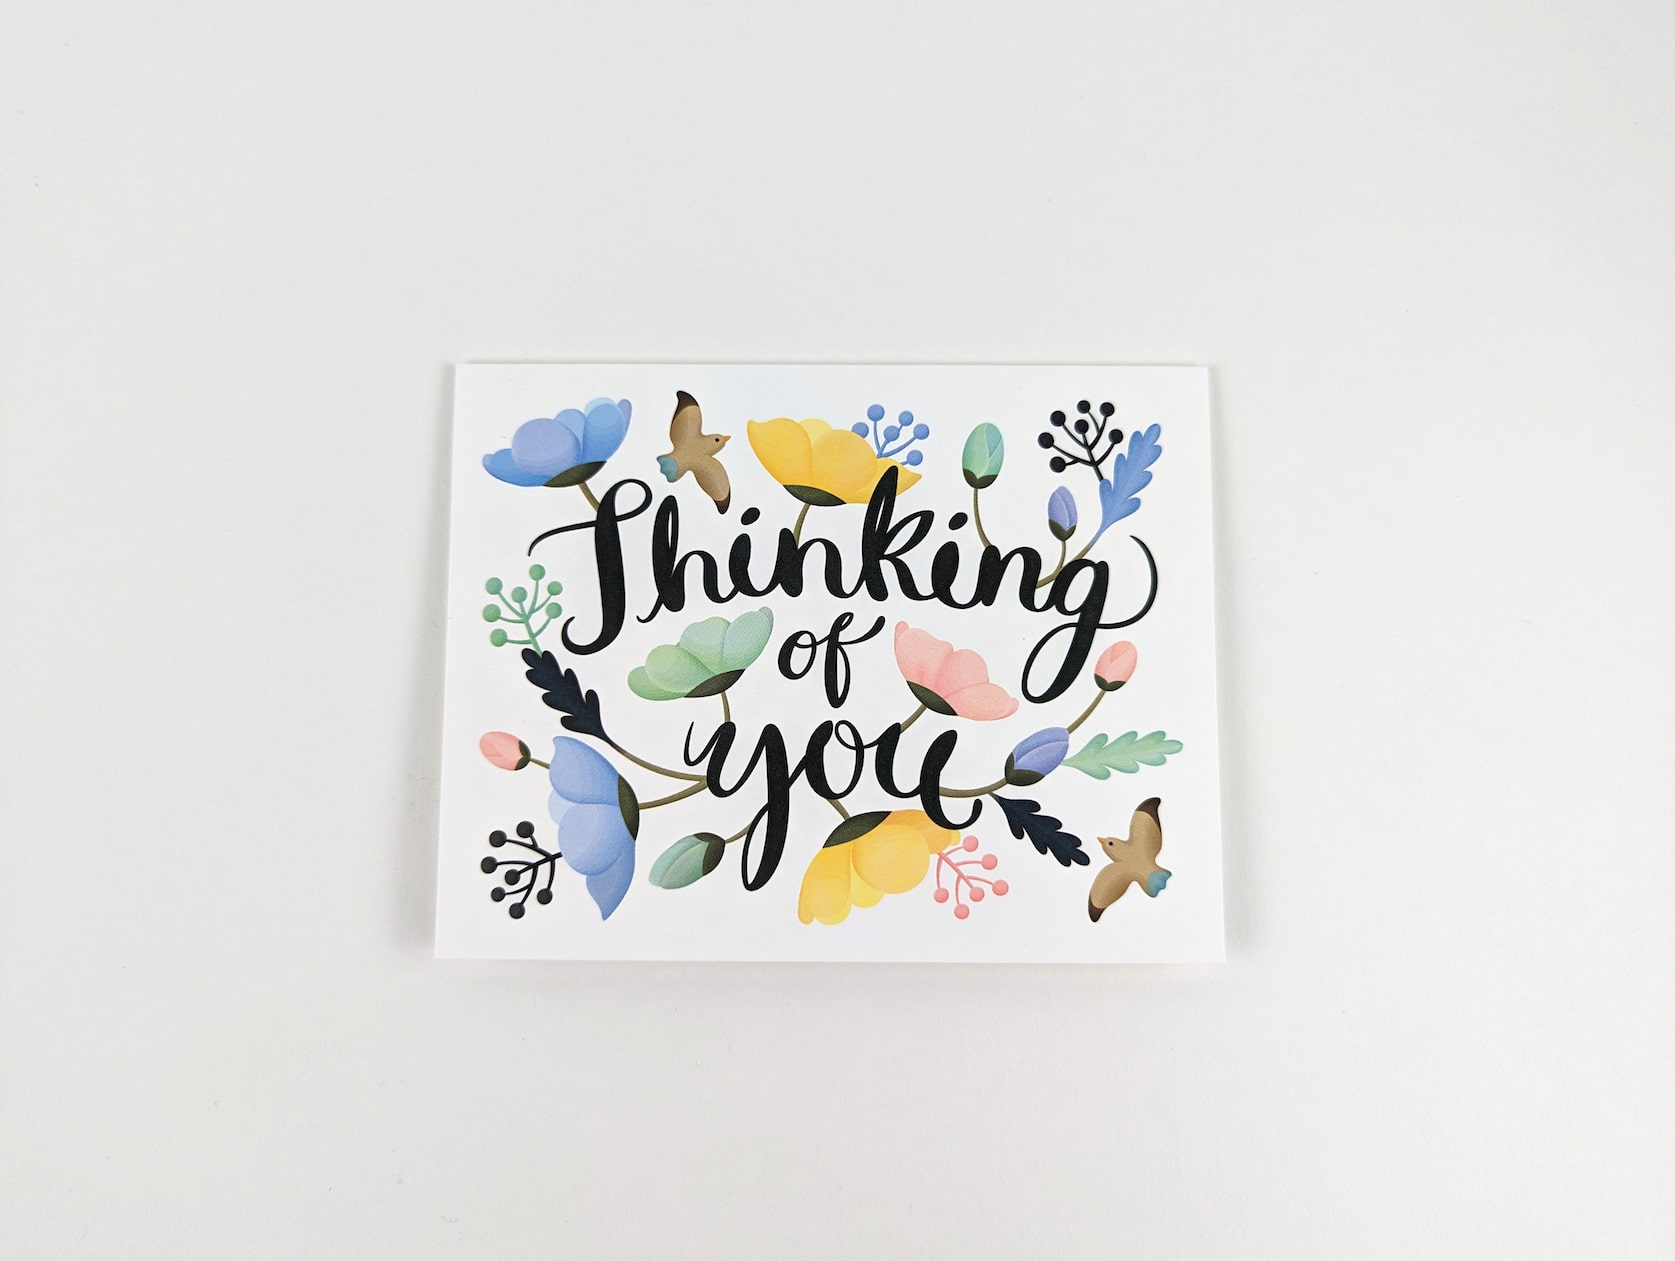 White horizontal card with black cursive text in the centre that reads: Thinking of you. A variety of pastel blue, yellow, green and pink poppies, sprigs and two brown songbirds are featured around the text.